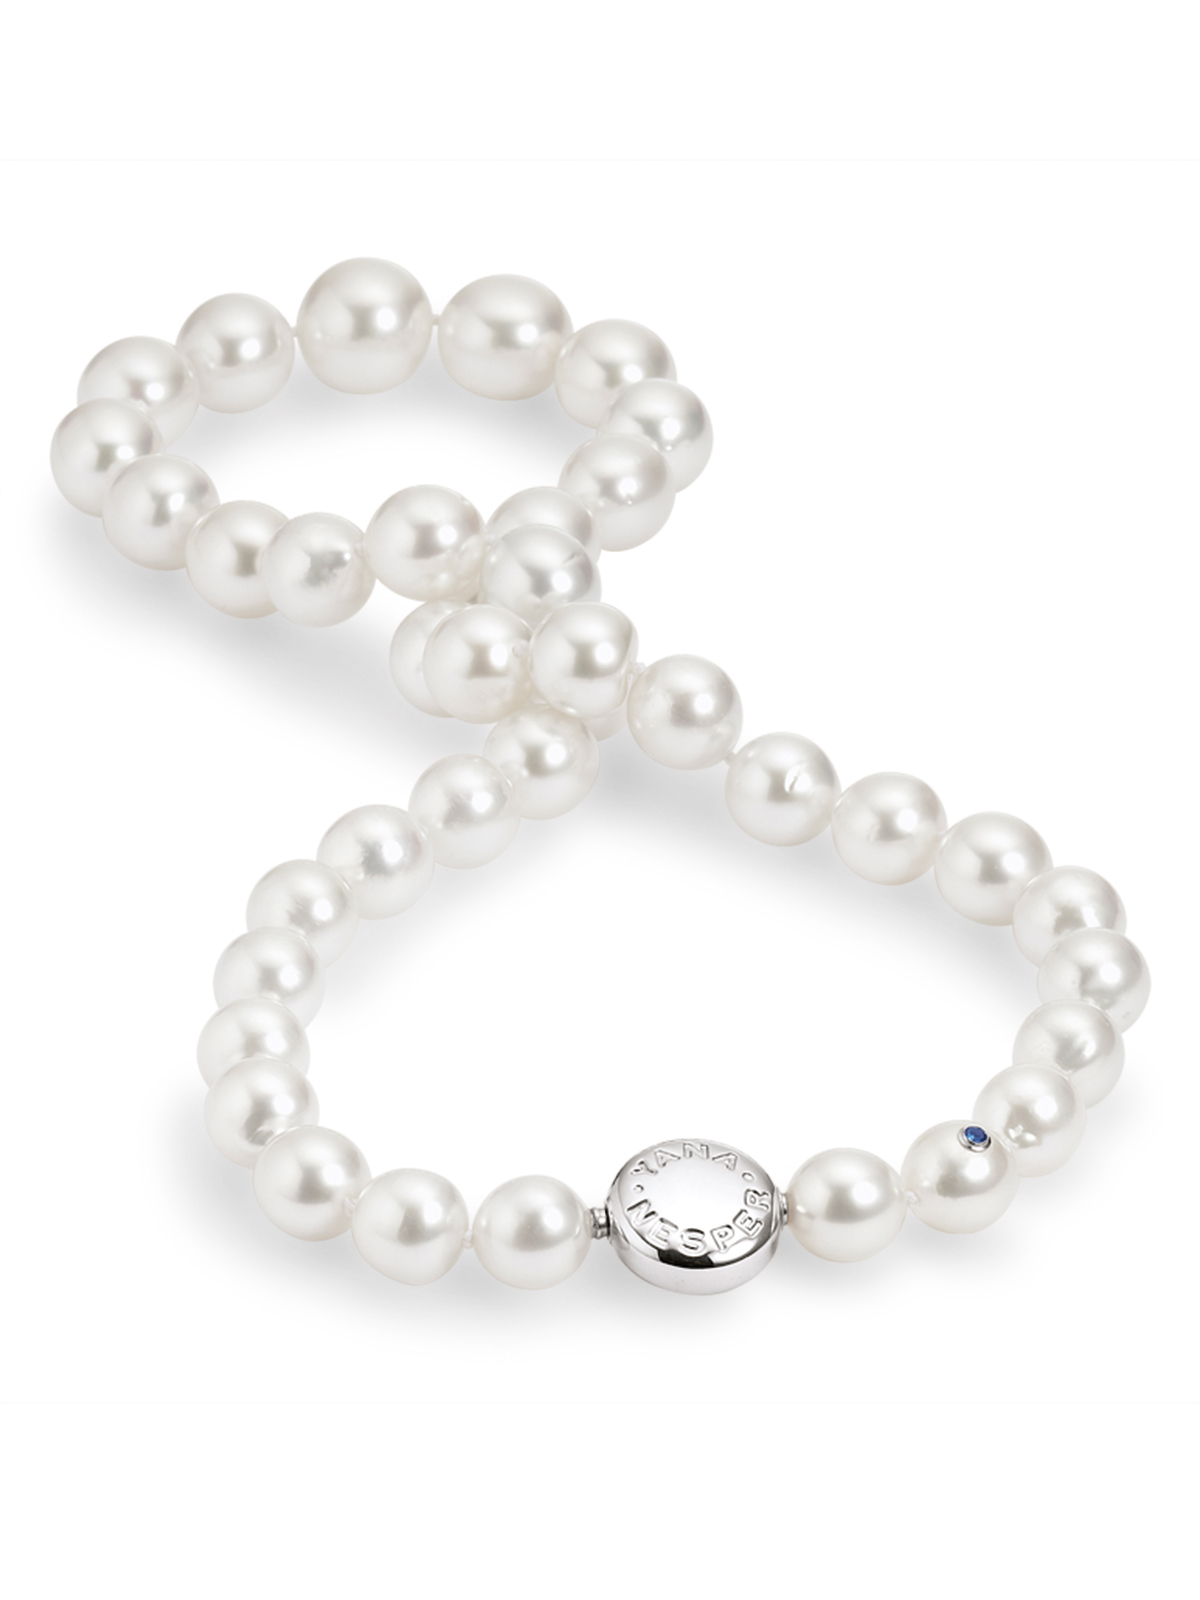 Classic pearl necklace with South Sea pearls